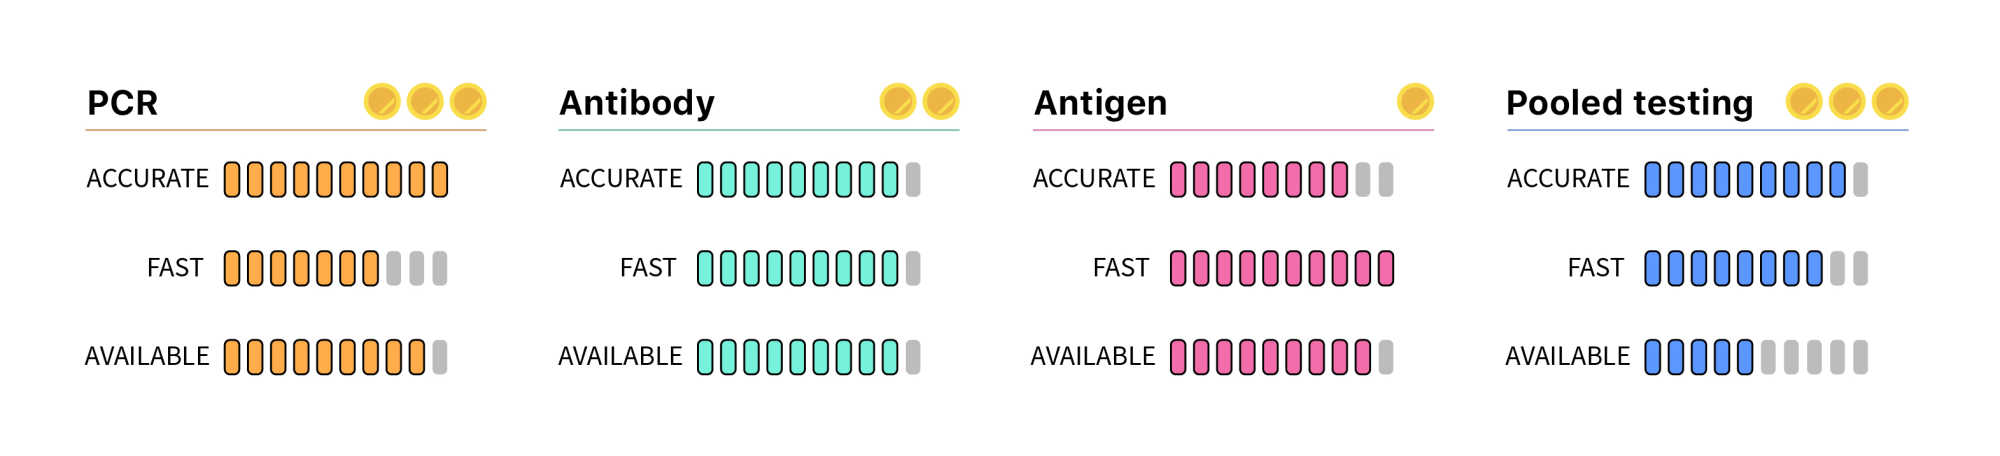 Four bar charts side by side showing how test types compare. PCR: 10/10 accurate, 7/10 fast, 10/10 available. Antibody: 9/10 accurate, 9/10 fast, 9/10 available. Antigen: 8/10 accurate, 10/10 fast, 9/10 available. Pooled testing: 9/10 accurate, 8/10 fast, 5/10 available.